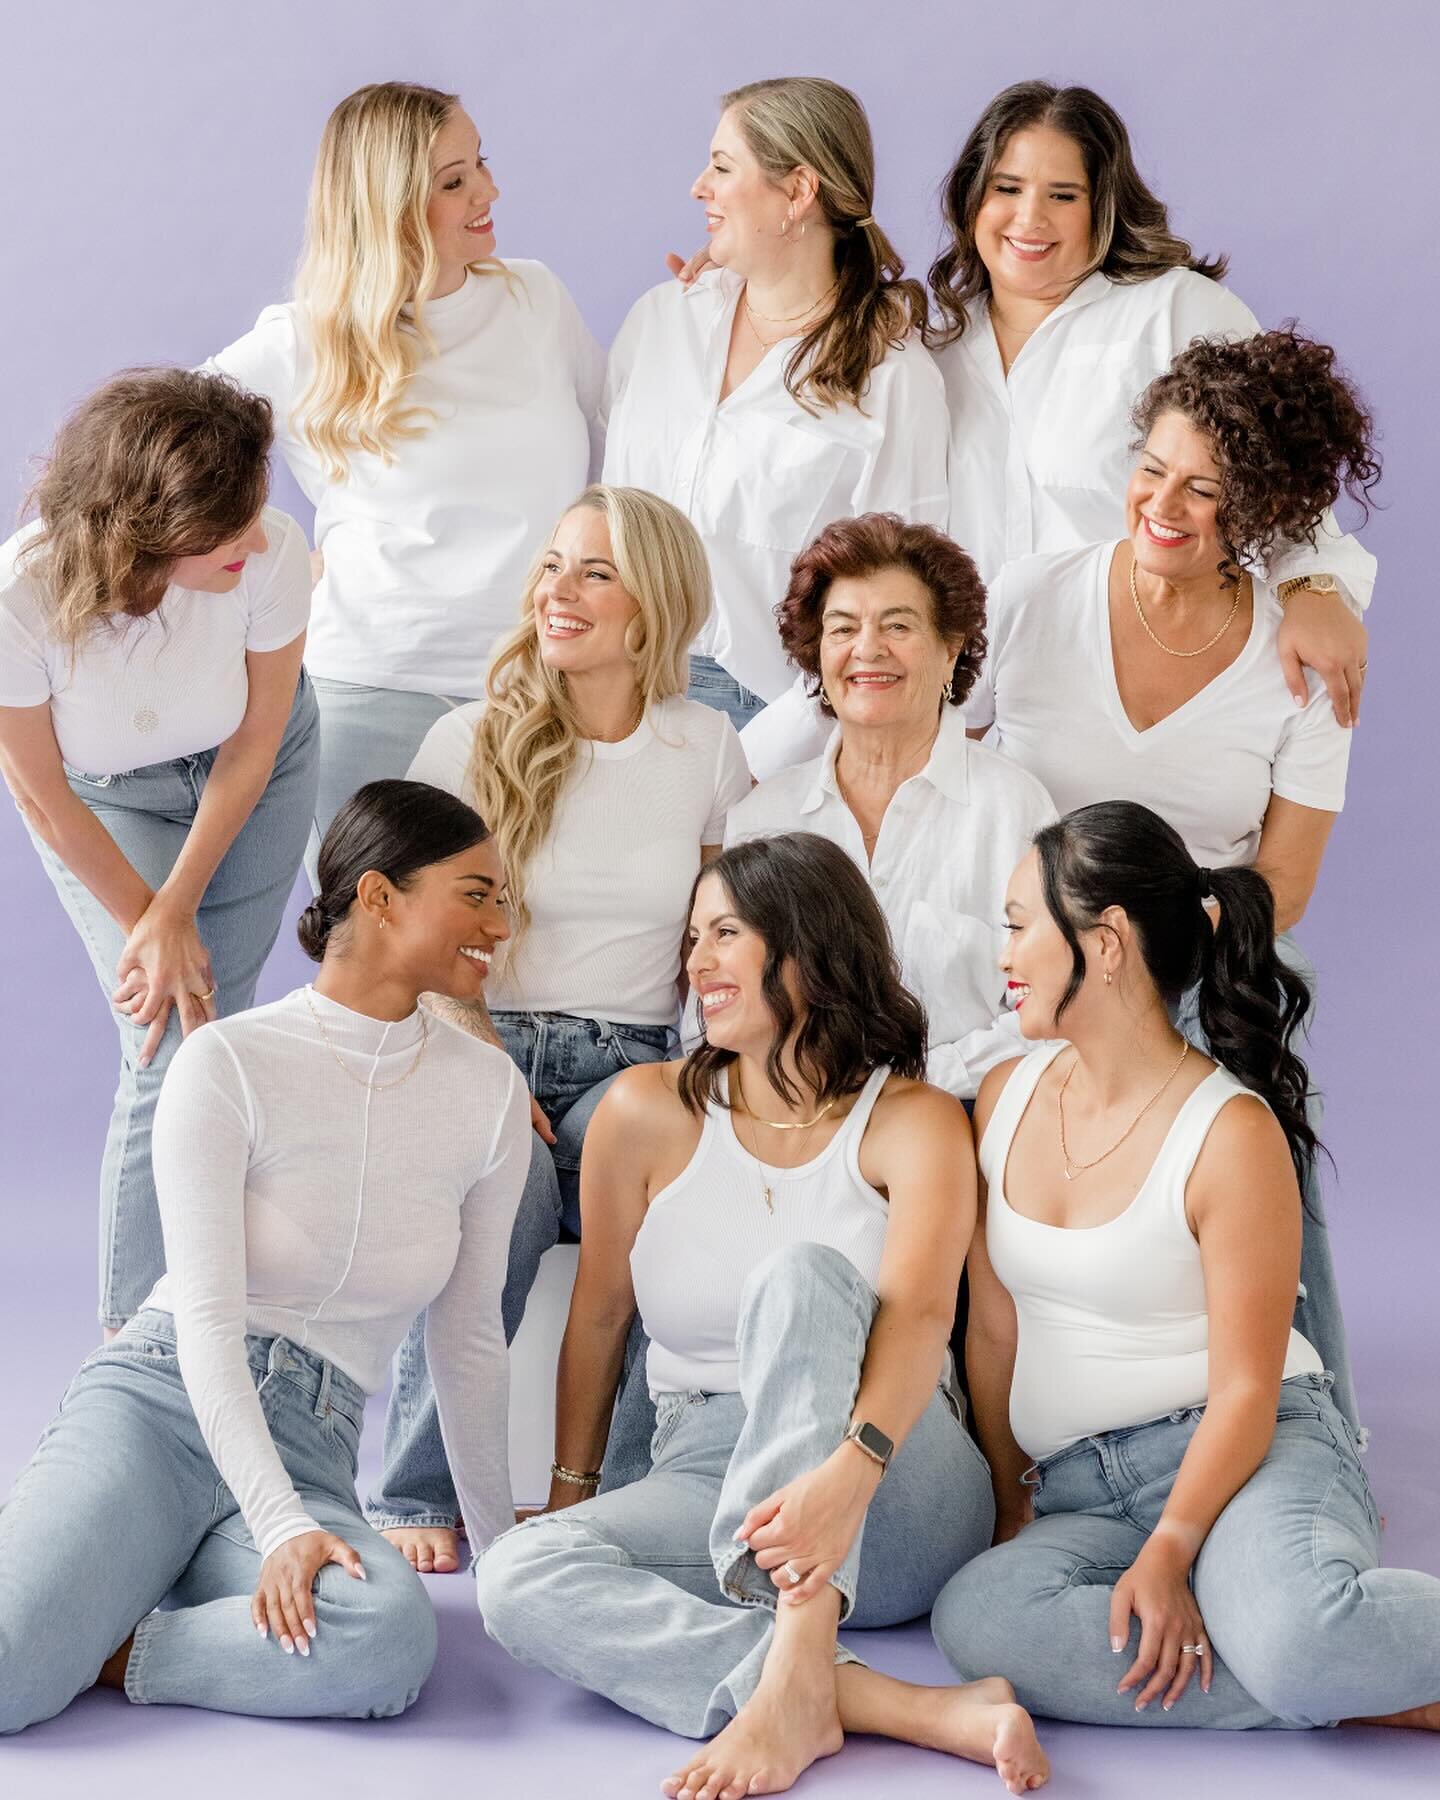 Happy International Women&rsquo;s Day! 💕

We are so honoured to have had the pleasure of photographing so many incredible women and the teams behind them.

Our clients do incredible work within their communities and we are so grateful they have invi